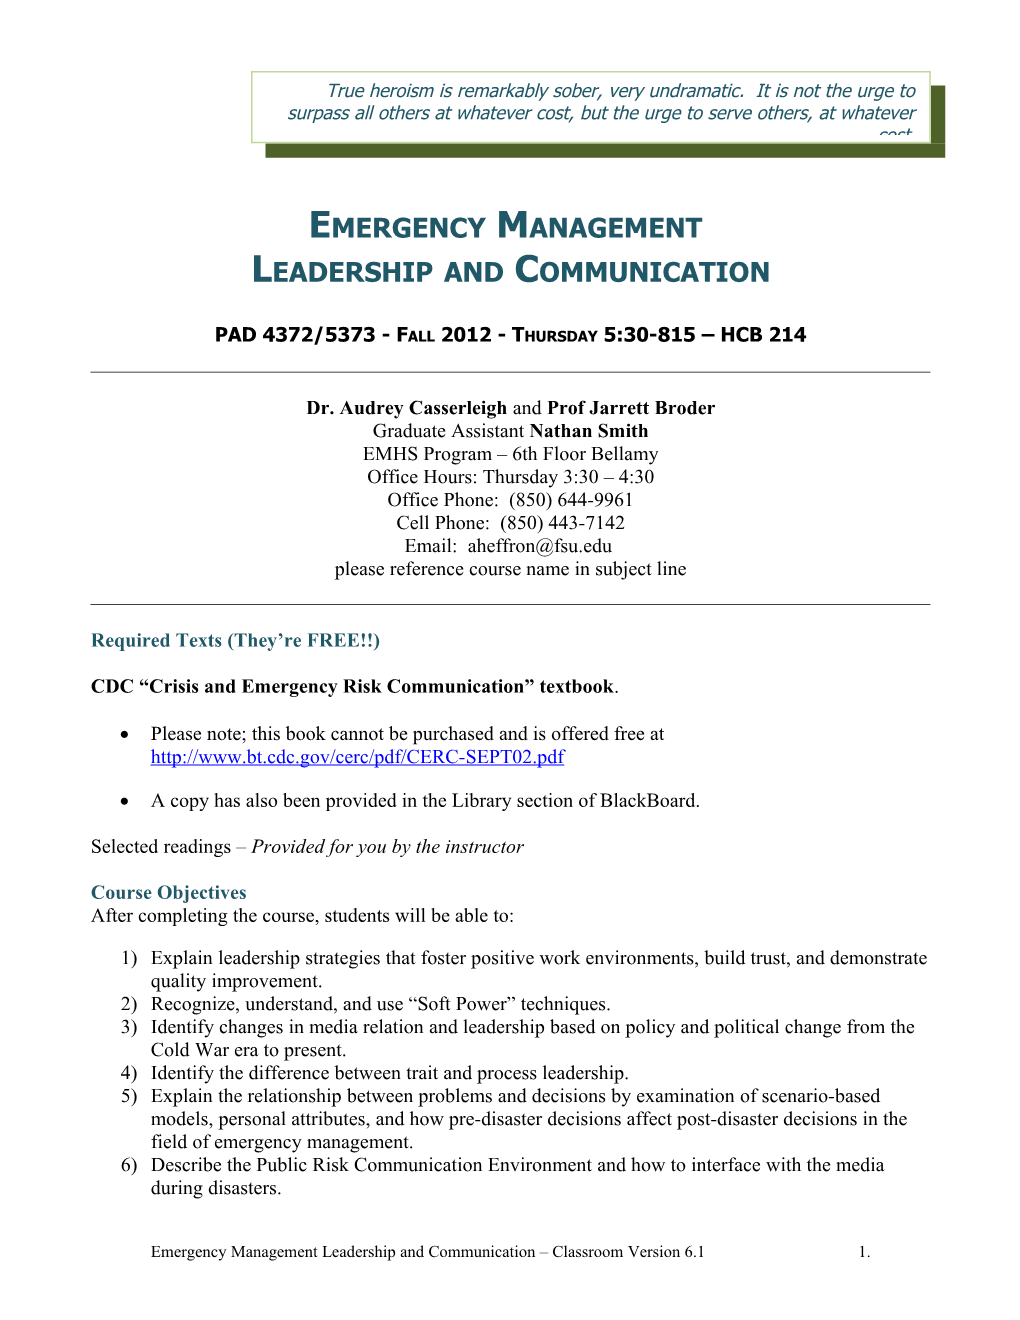 Foundations in Emergency Management